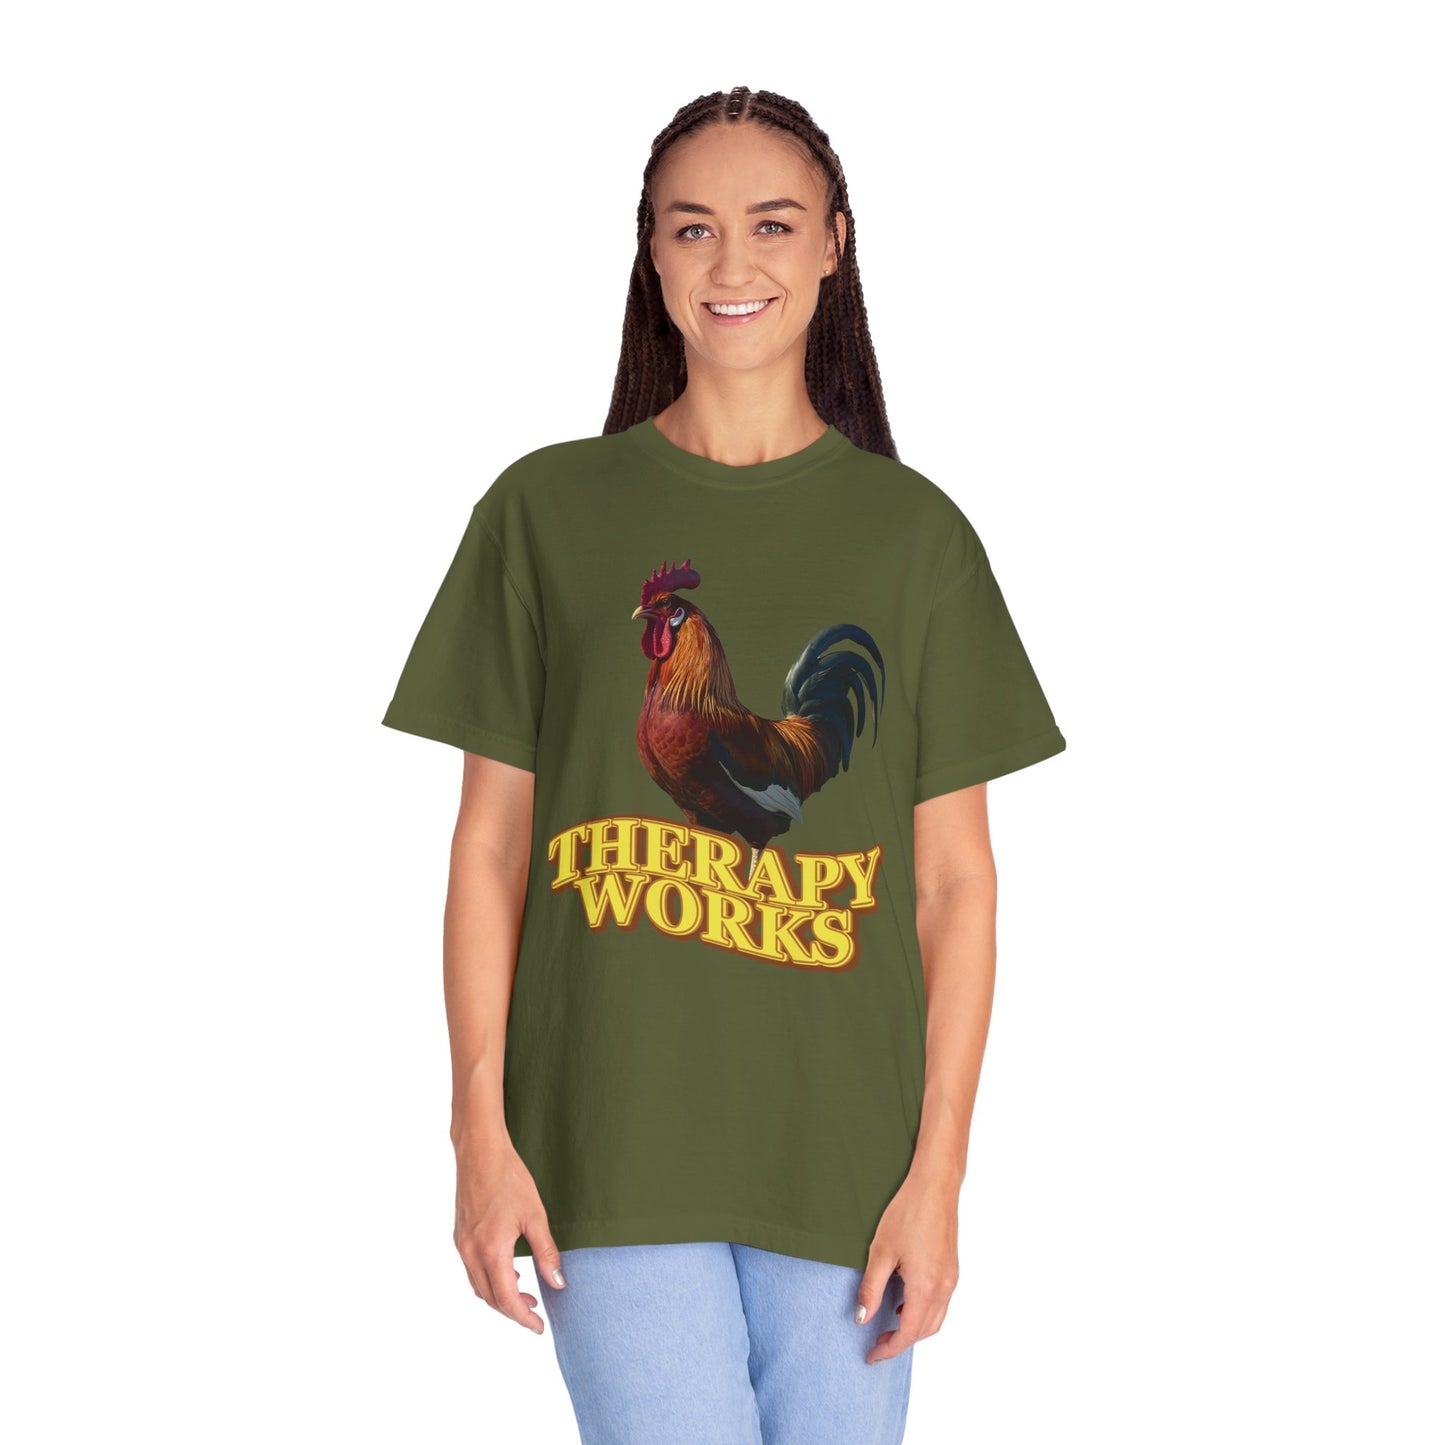 Therapy Works - Tee